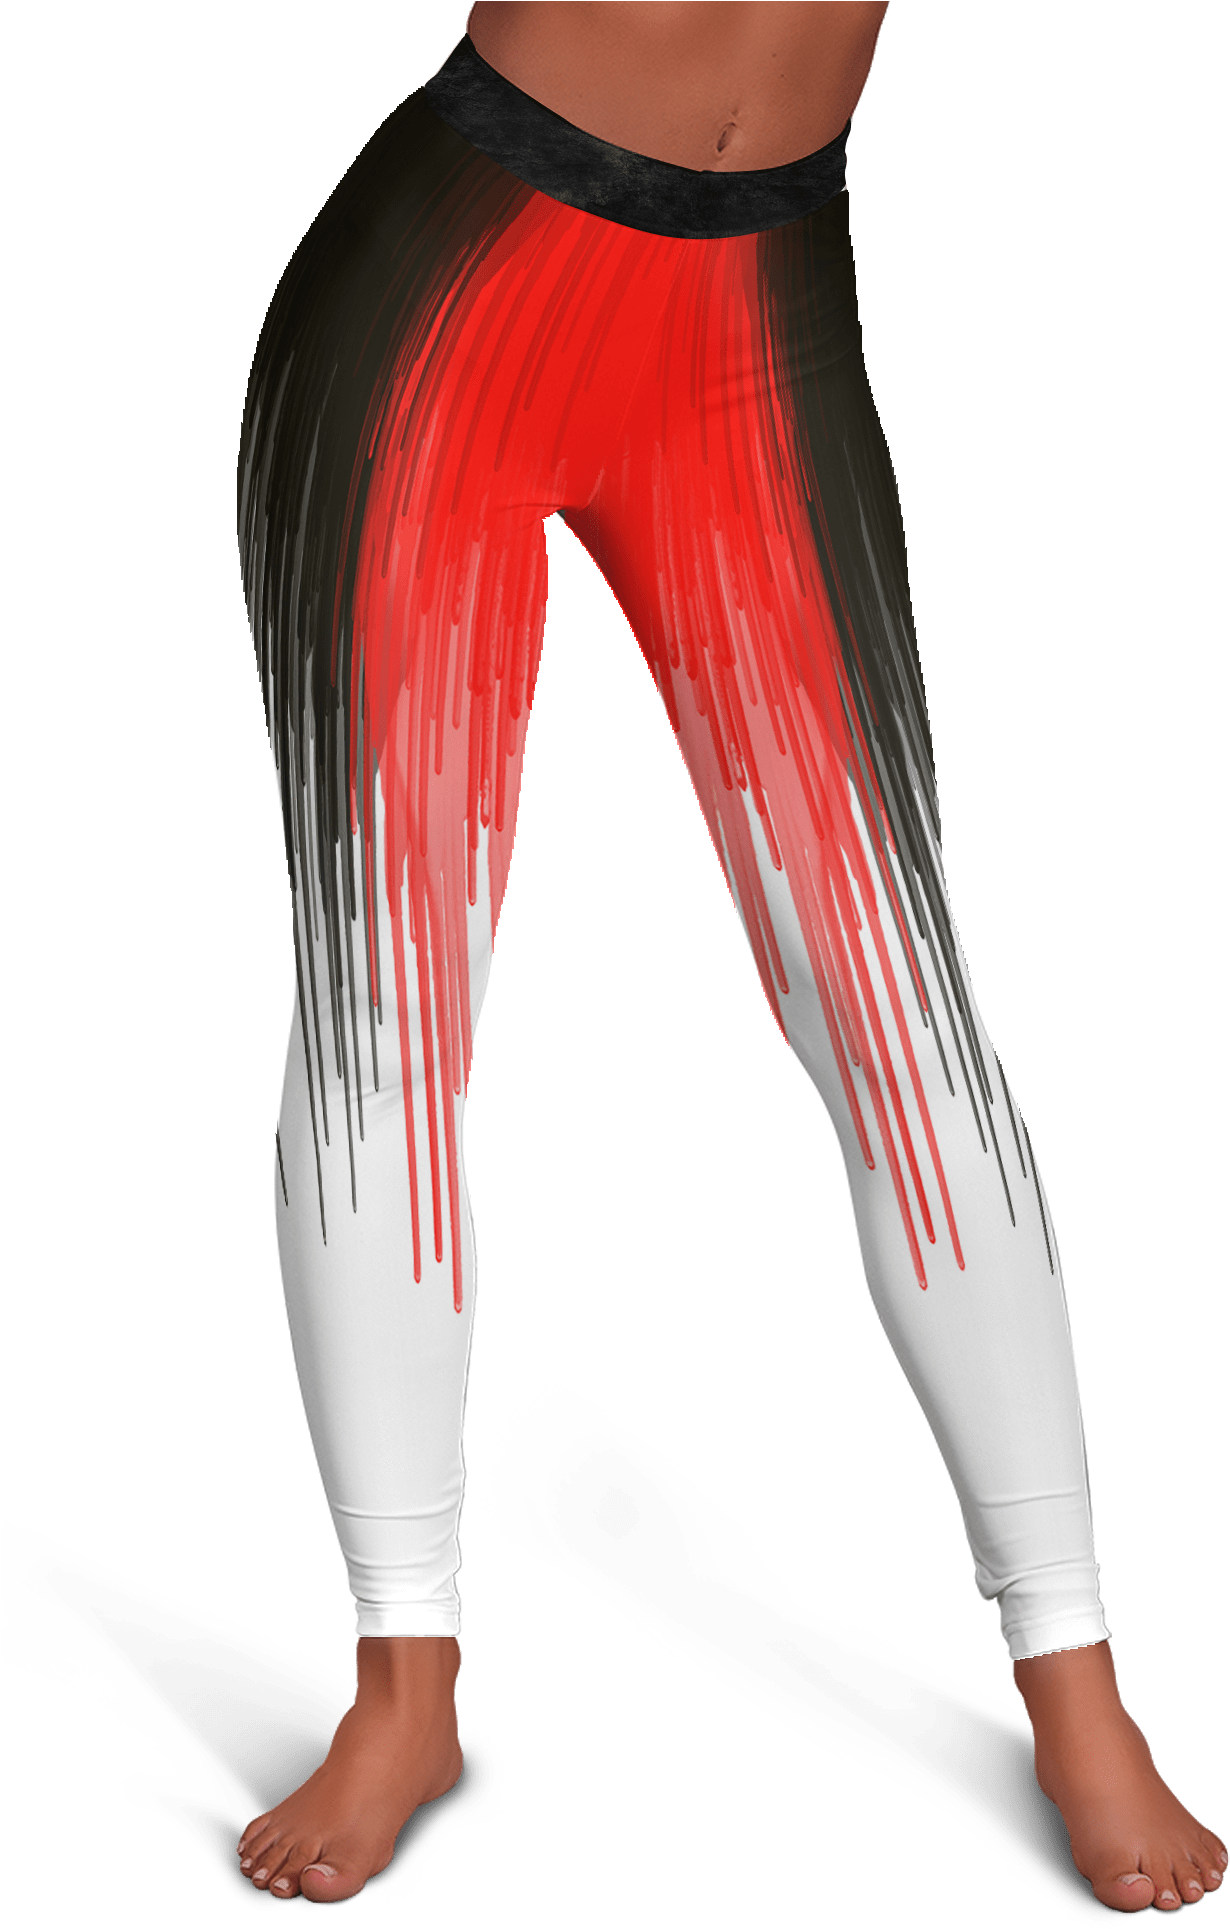 A Person Wearing White And Red Leggings With Black And Red Paint Splatters